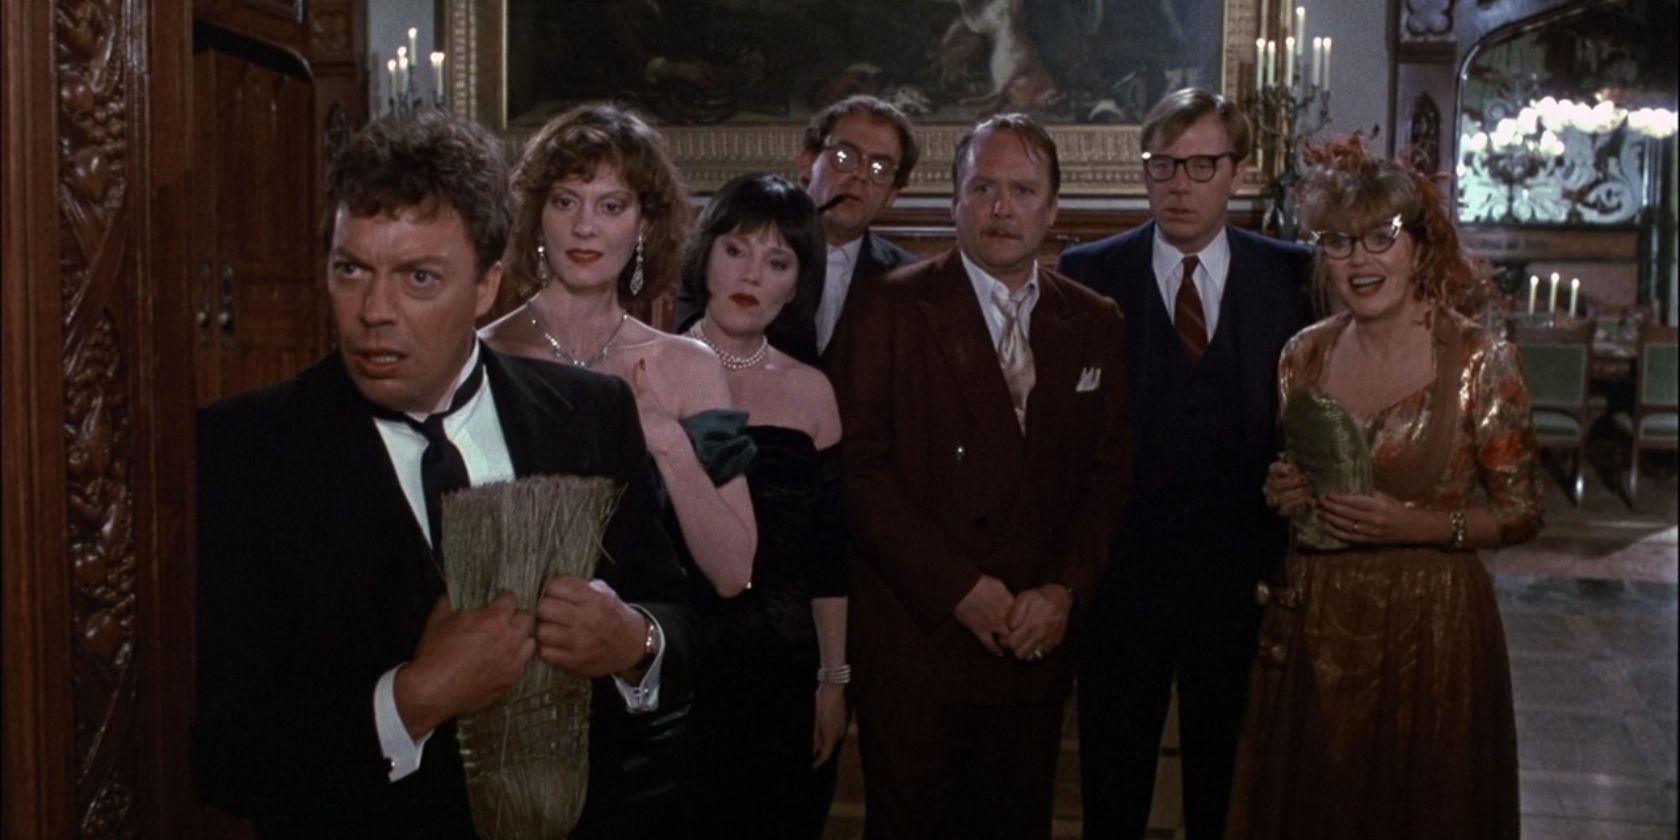 The cast of Clue looking at something in shock